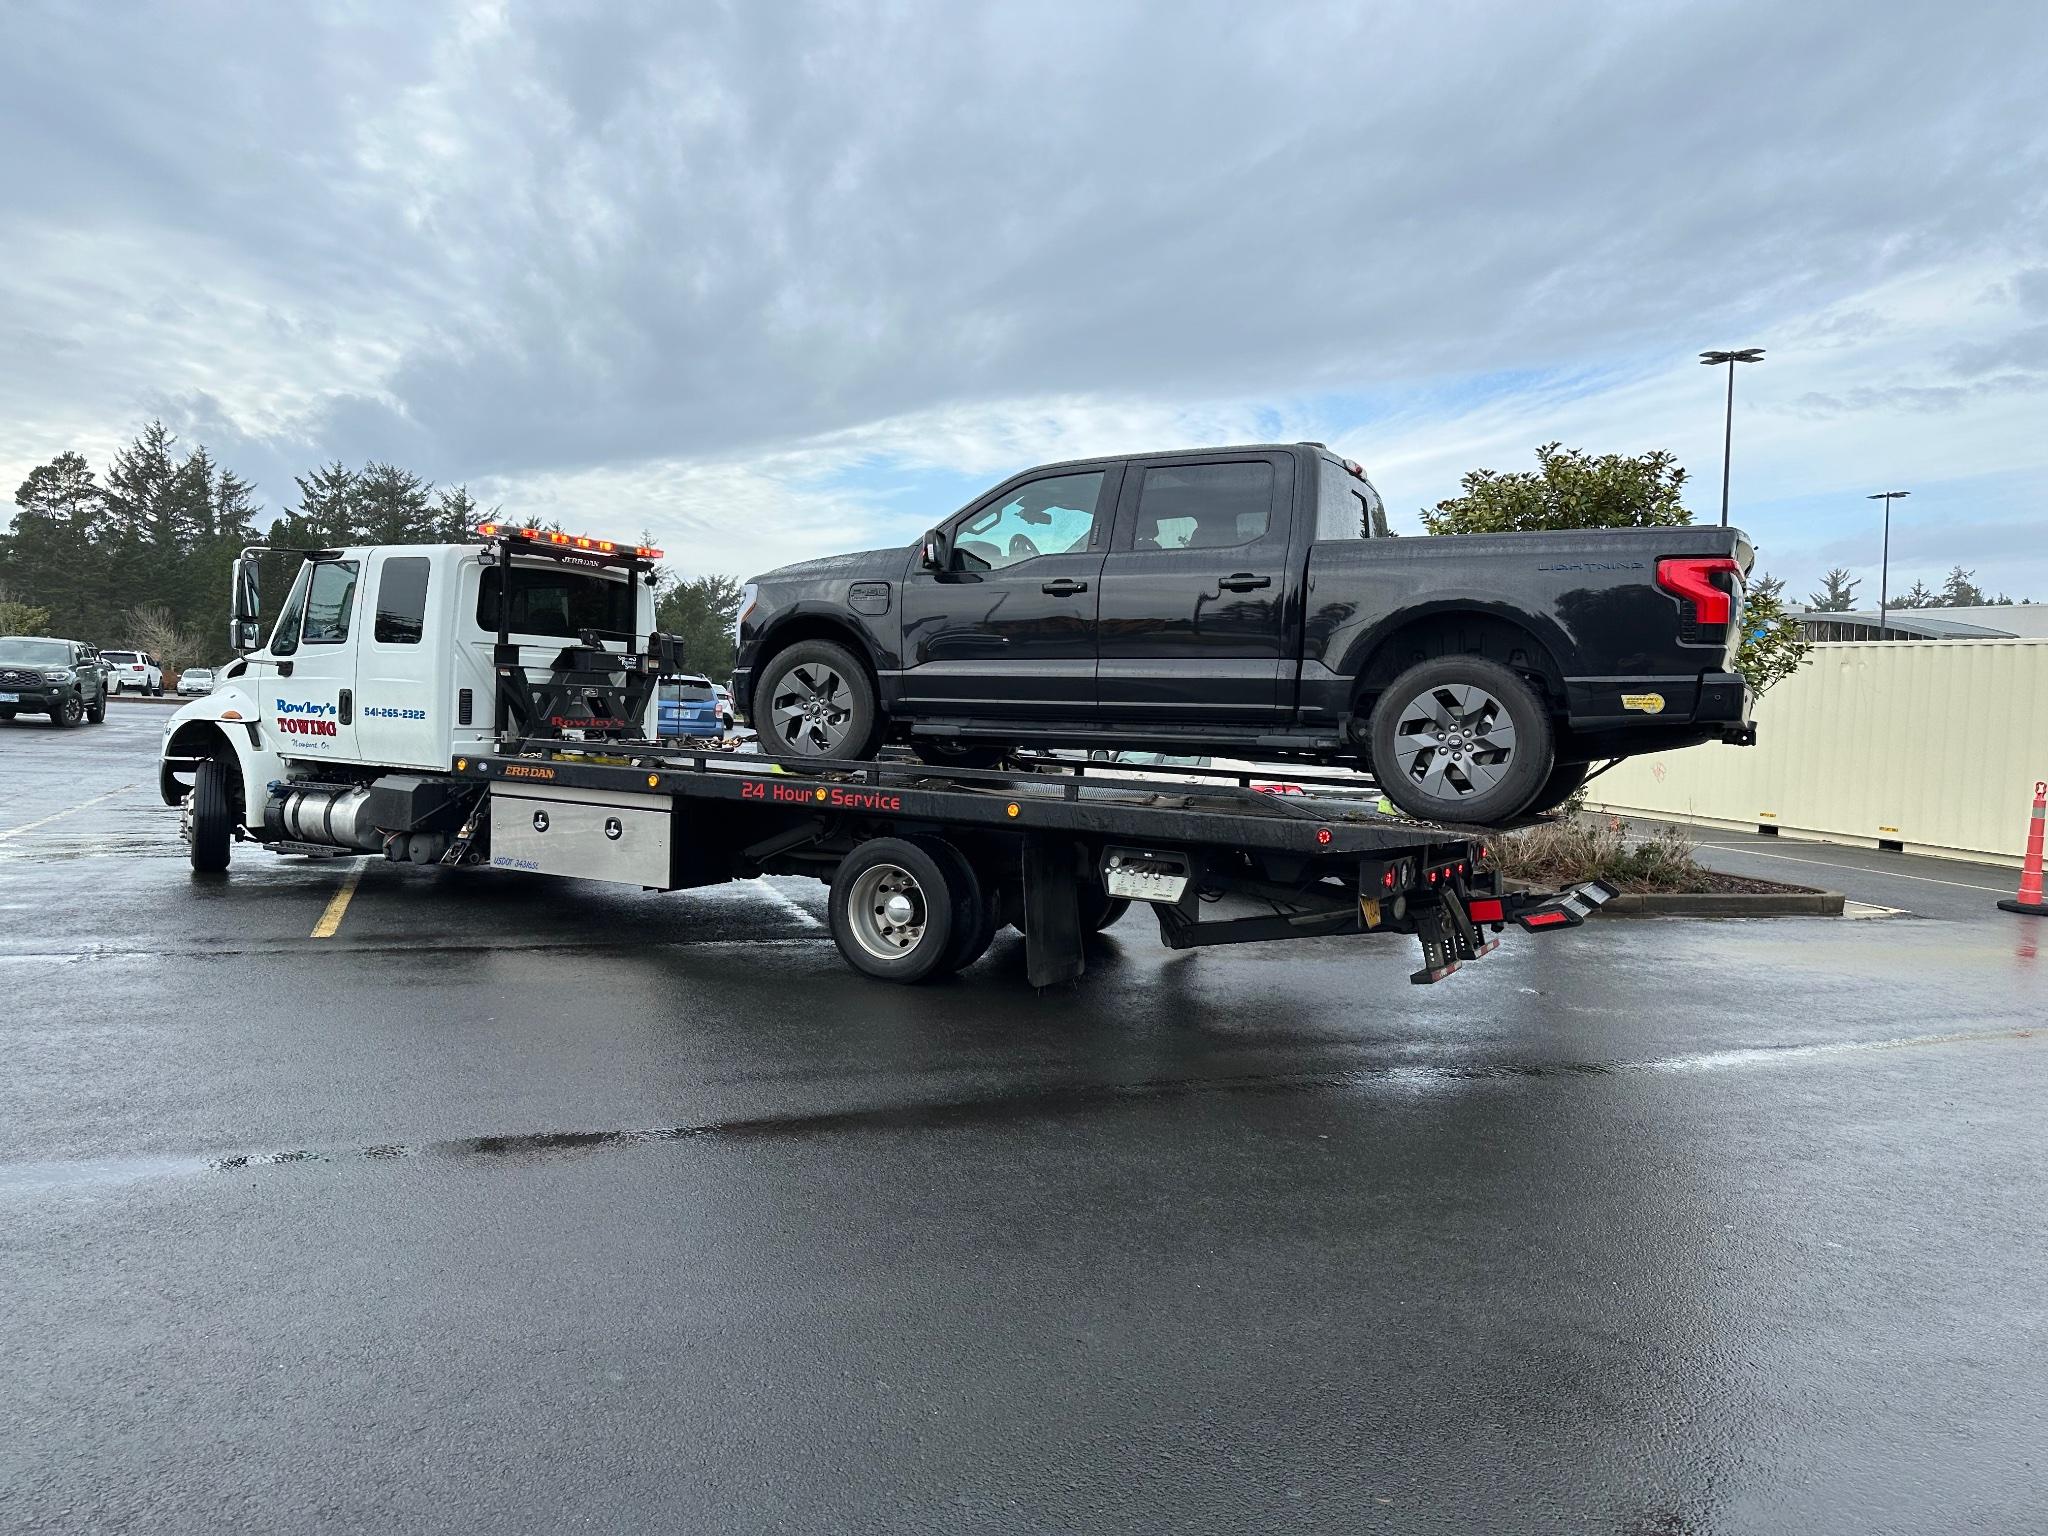 Ford F-150 Lightning Lightning towed away from Electrify America charging station “after the EA charger fried my truck” FimnV-ZacAI-ck8